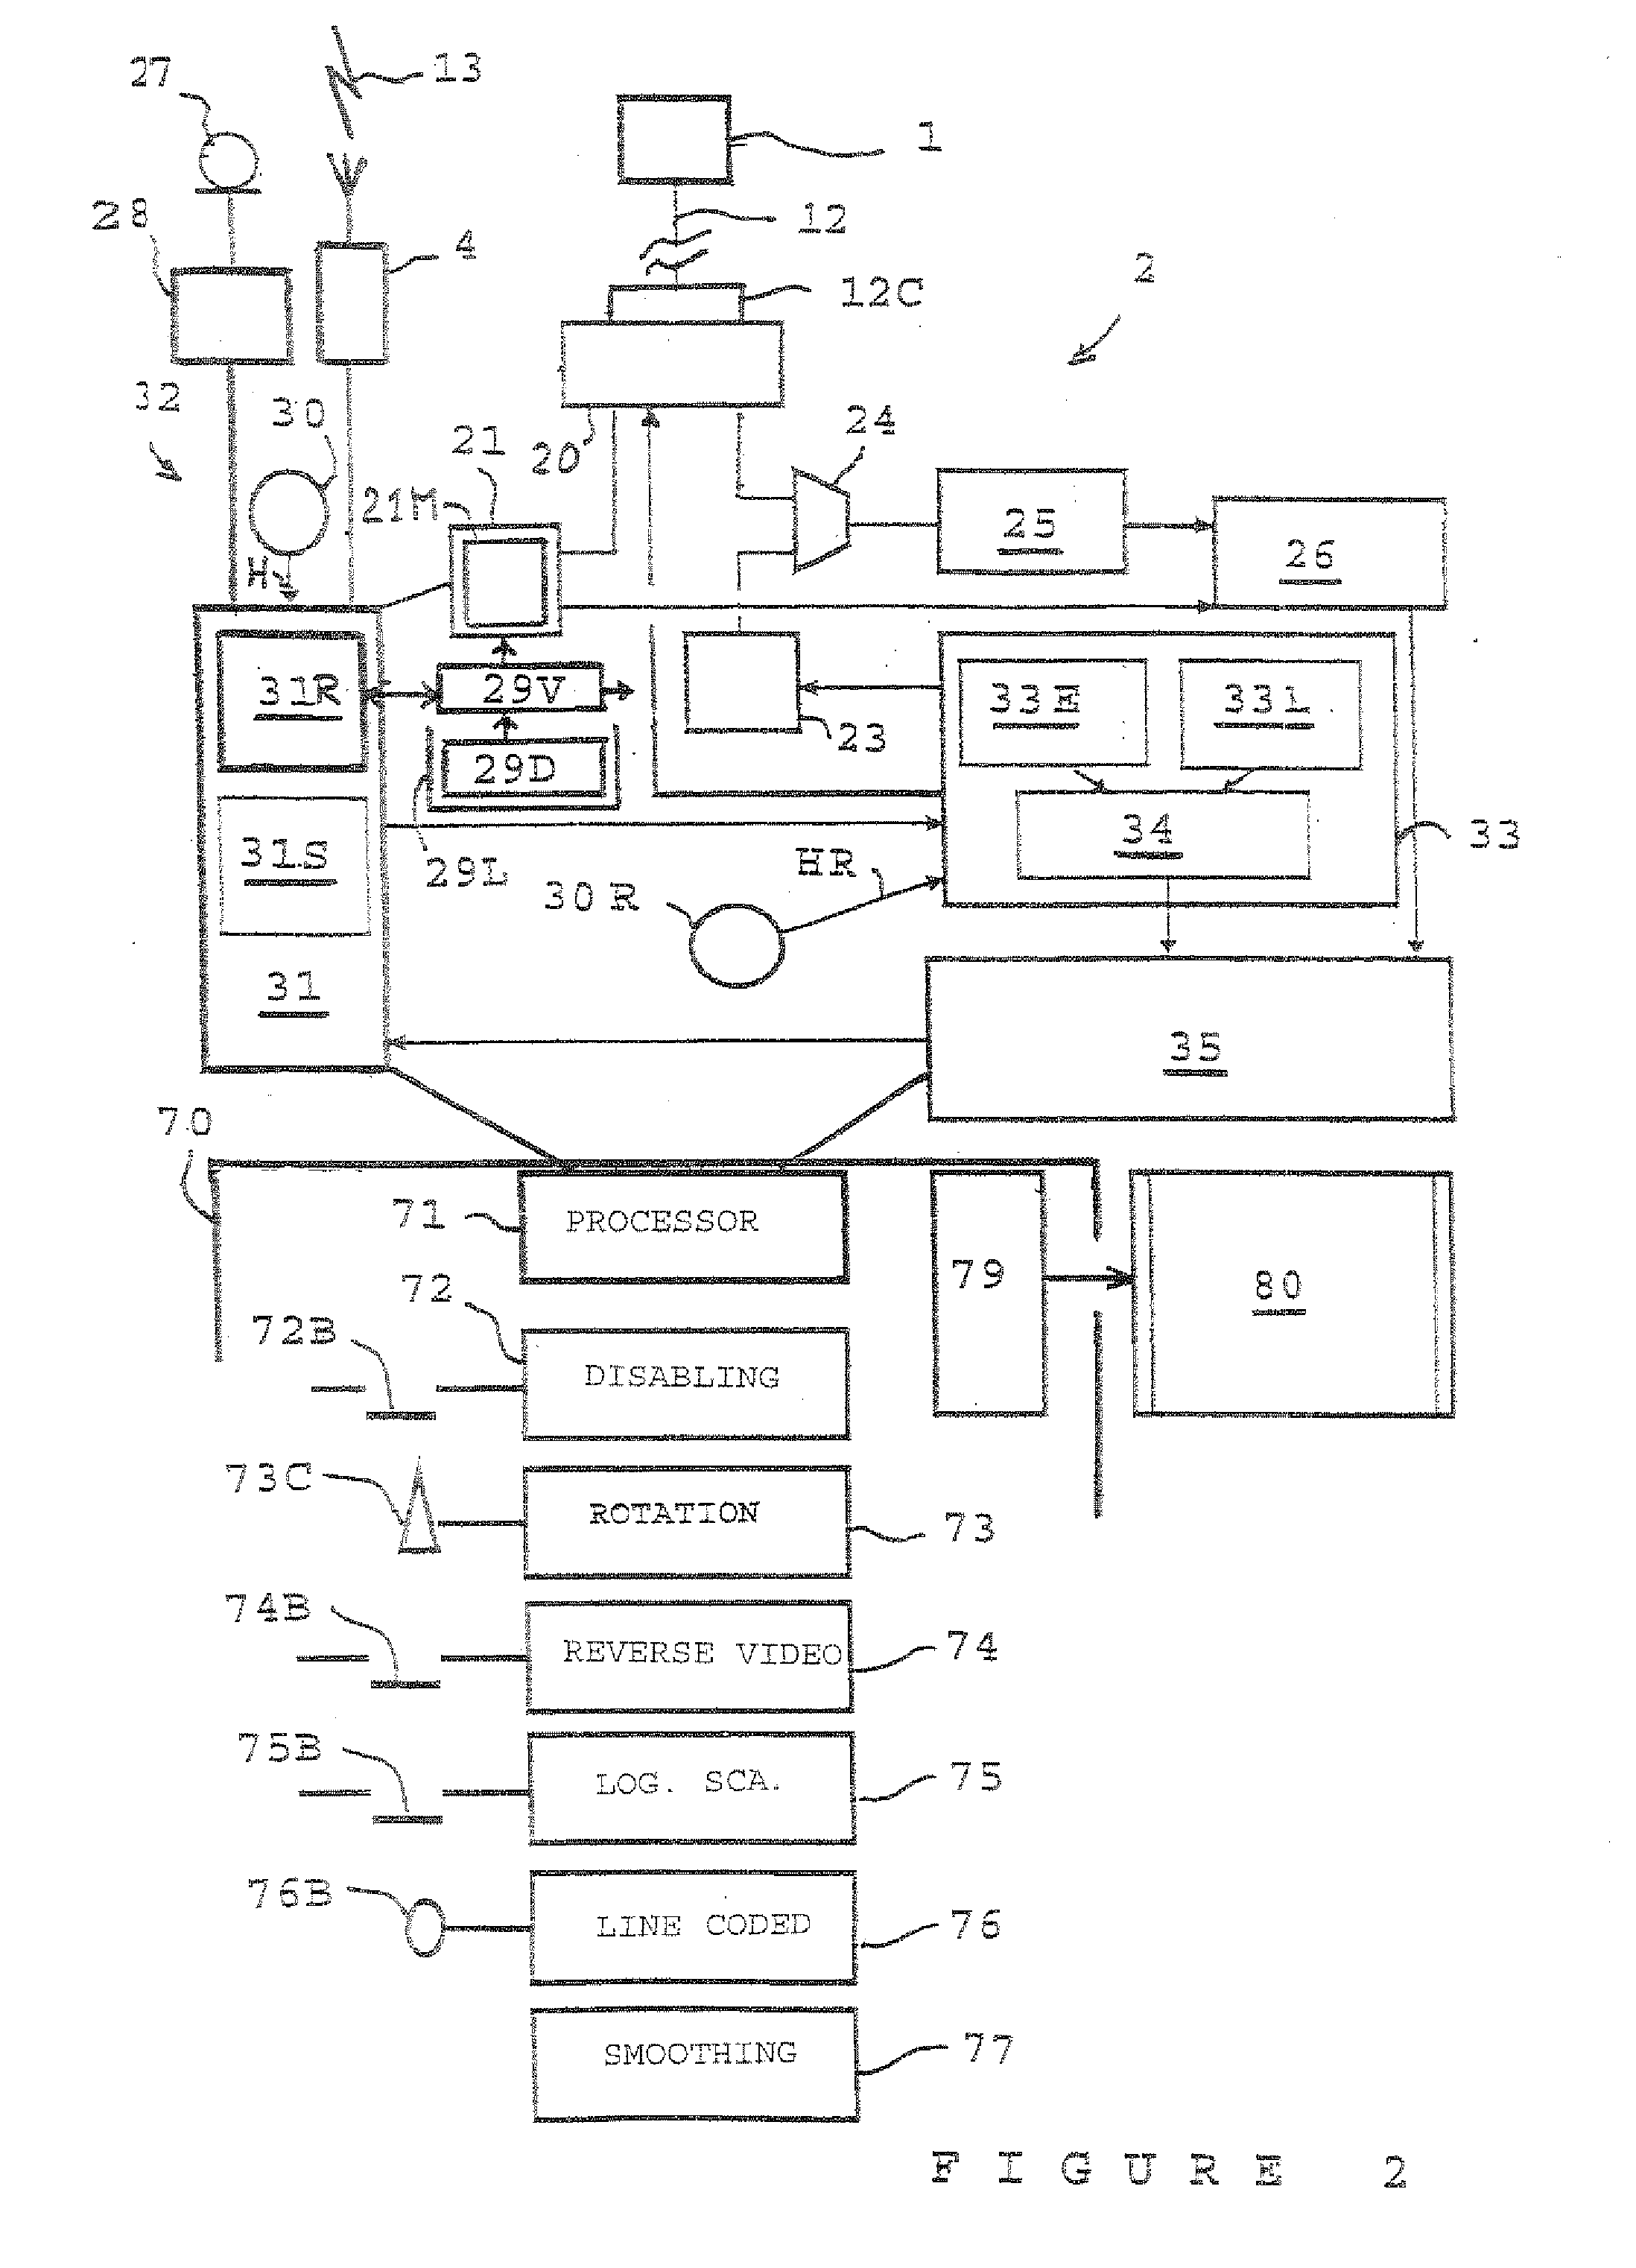 System Including A Portable Device For Receiving Dental Images